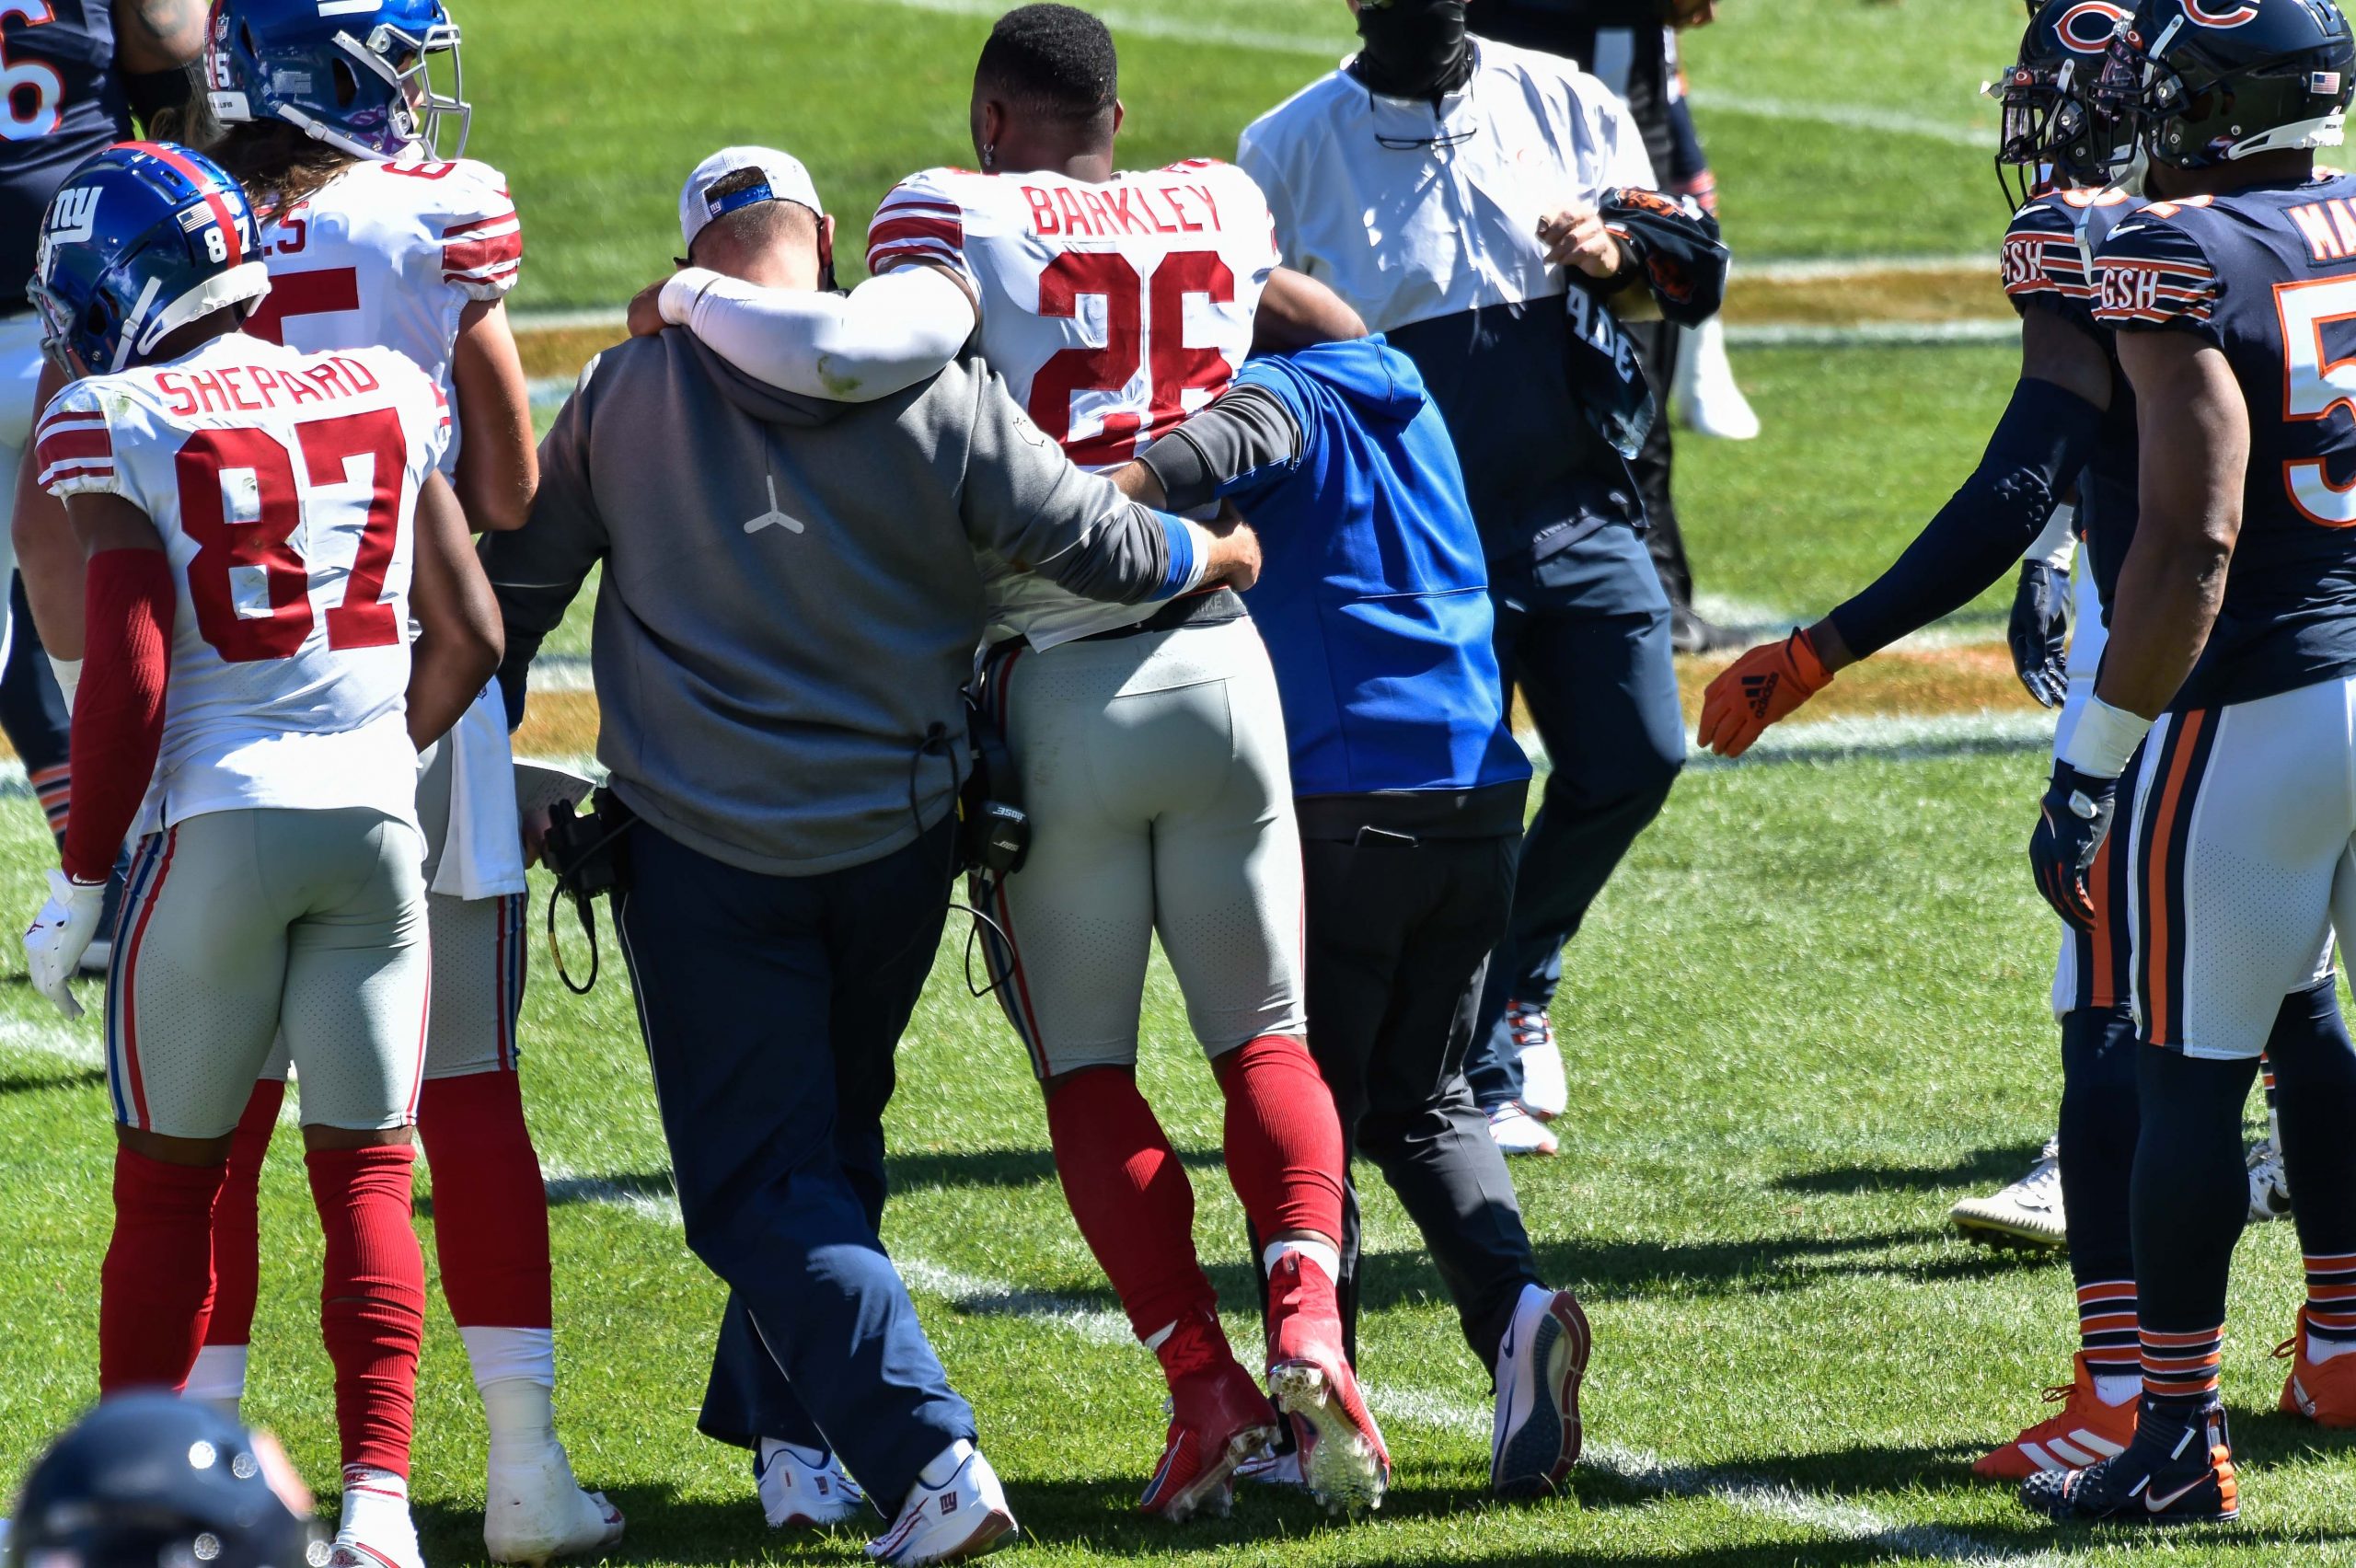 Giants halfback Saquon Barkley has ACL injury to right knee